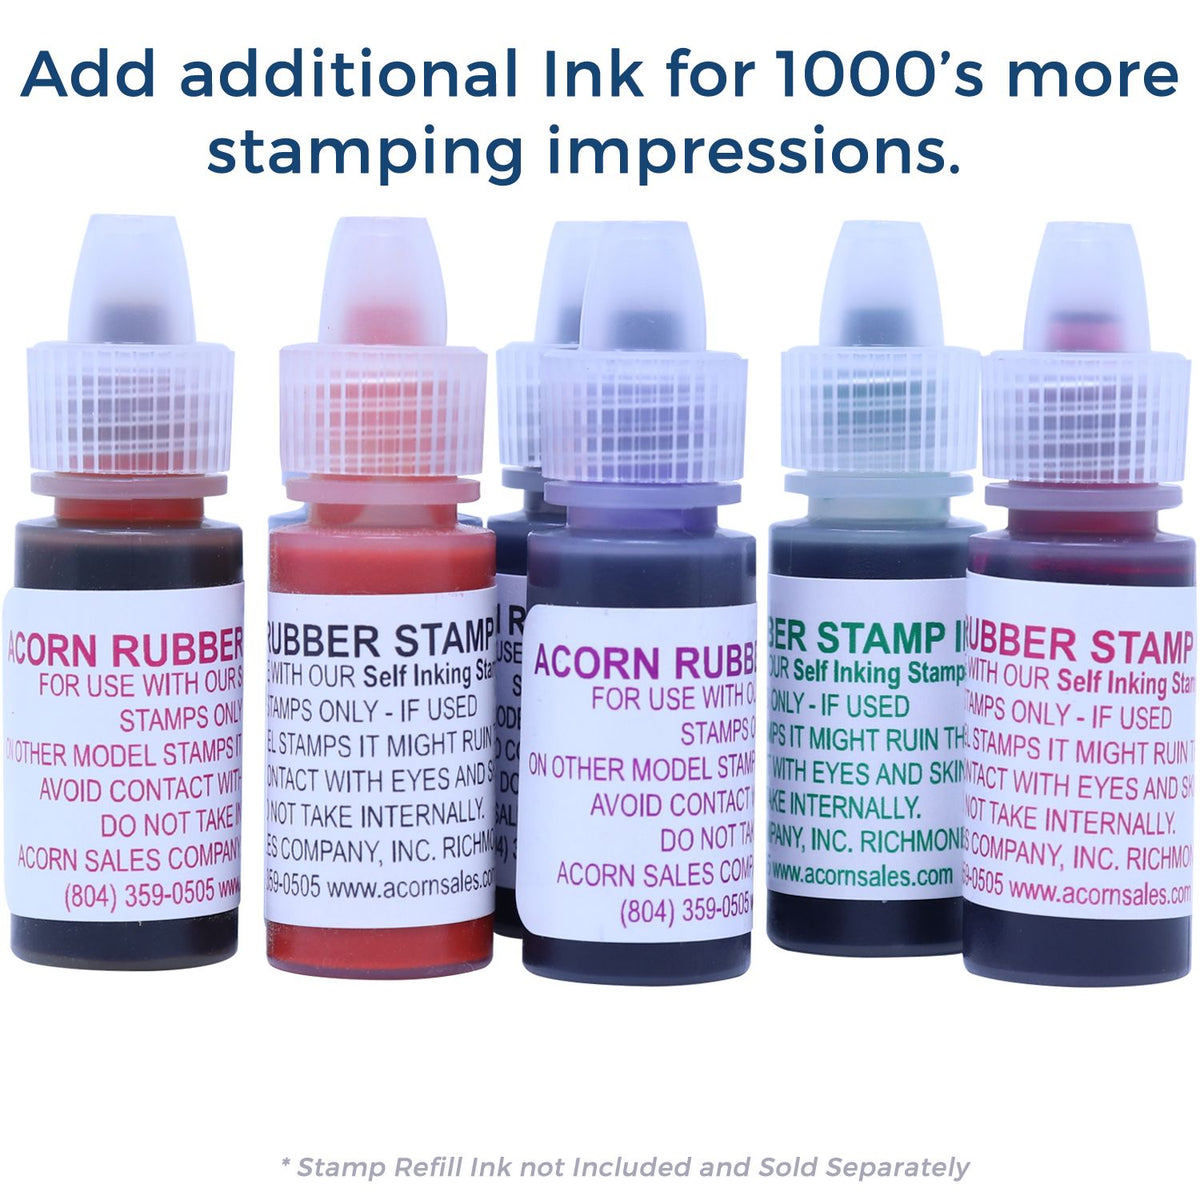 Refill Ink for Self-Inking Round Sad Smiley Stamp Available